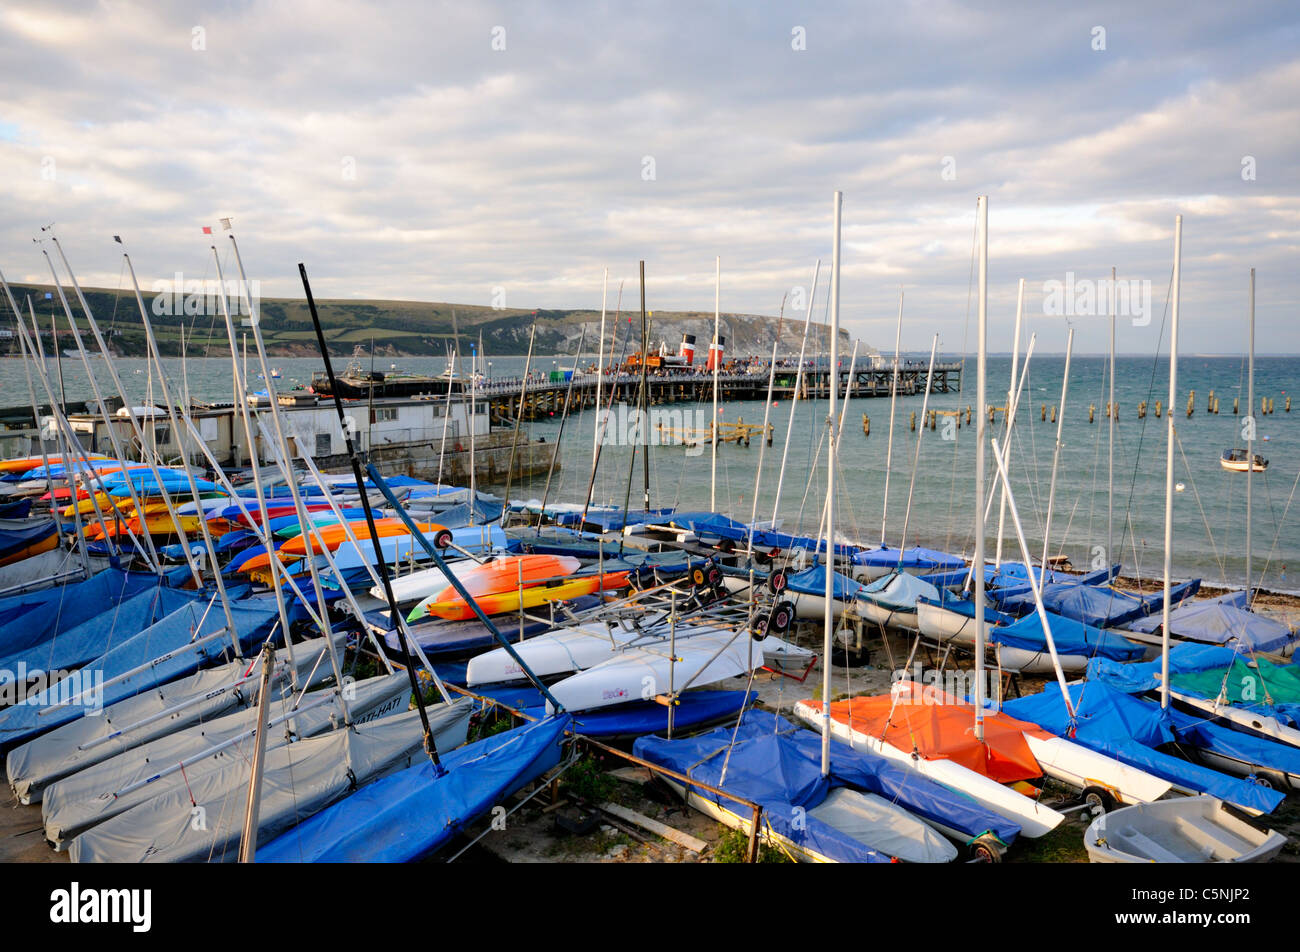 Waverley Paddle Steamer docked at Swanage Pier with Sailing Boats in forground, Dorset, England. Stock Photo